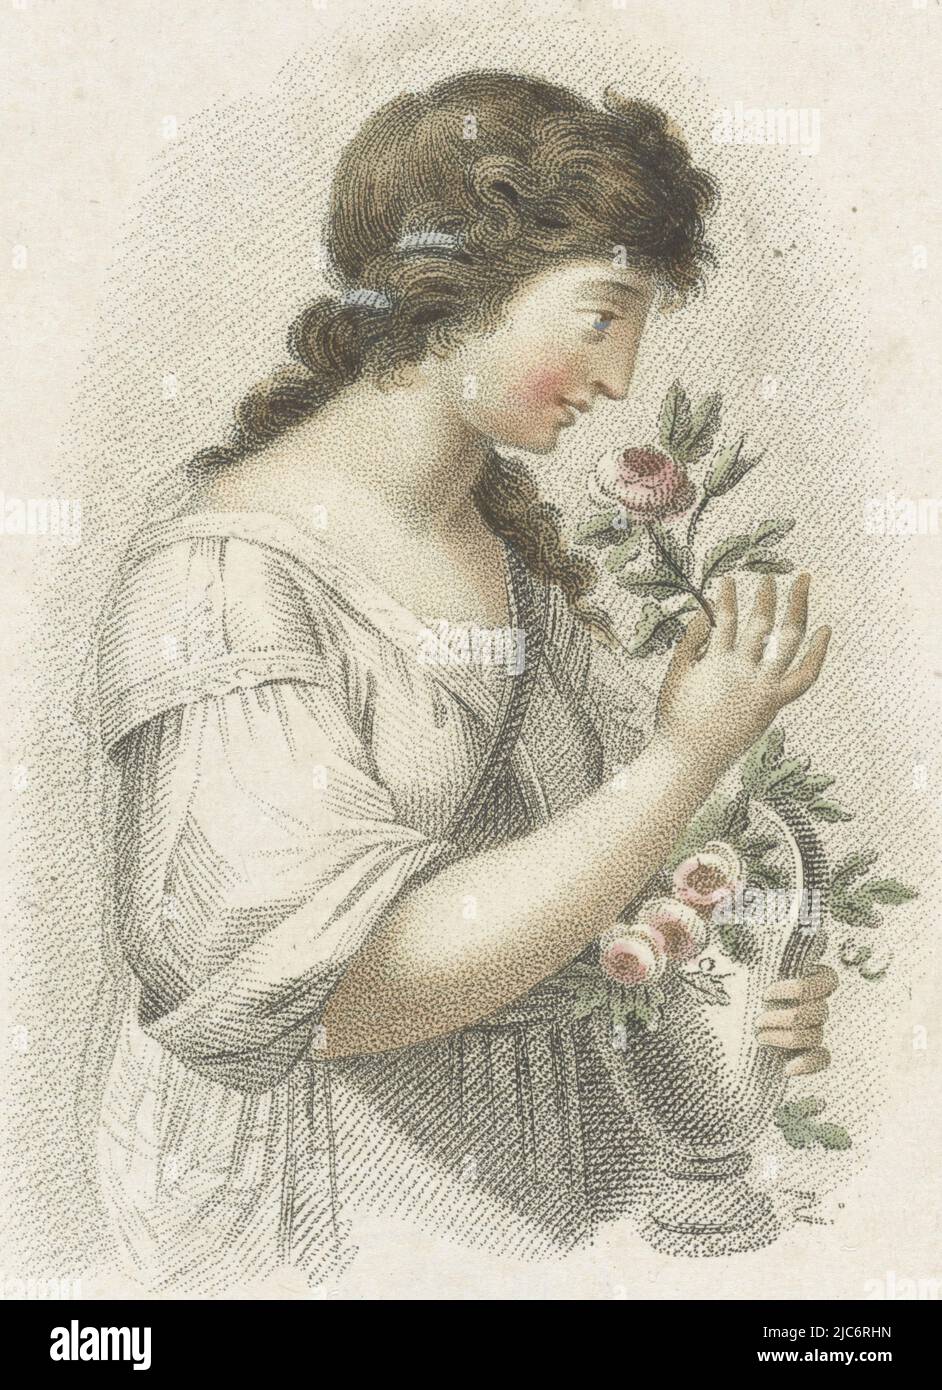 A woman smells the flower she is taking from the vase in her hand, Smell Geruch  Five senses represented by women figures (series title) Die Funf Sinne (series title), print maker: Ludwig Gottlieb Portman, (mentioned on object), Schiavonetti, Noord-Nederland, 1787 - 1828, paper, h 113 mm × w 76 mm Stock Photo